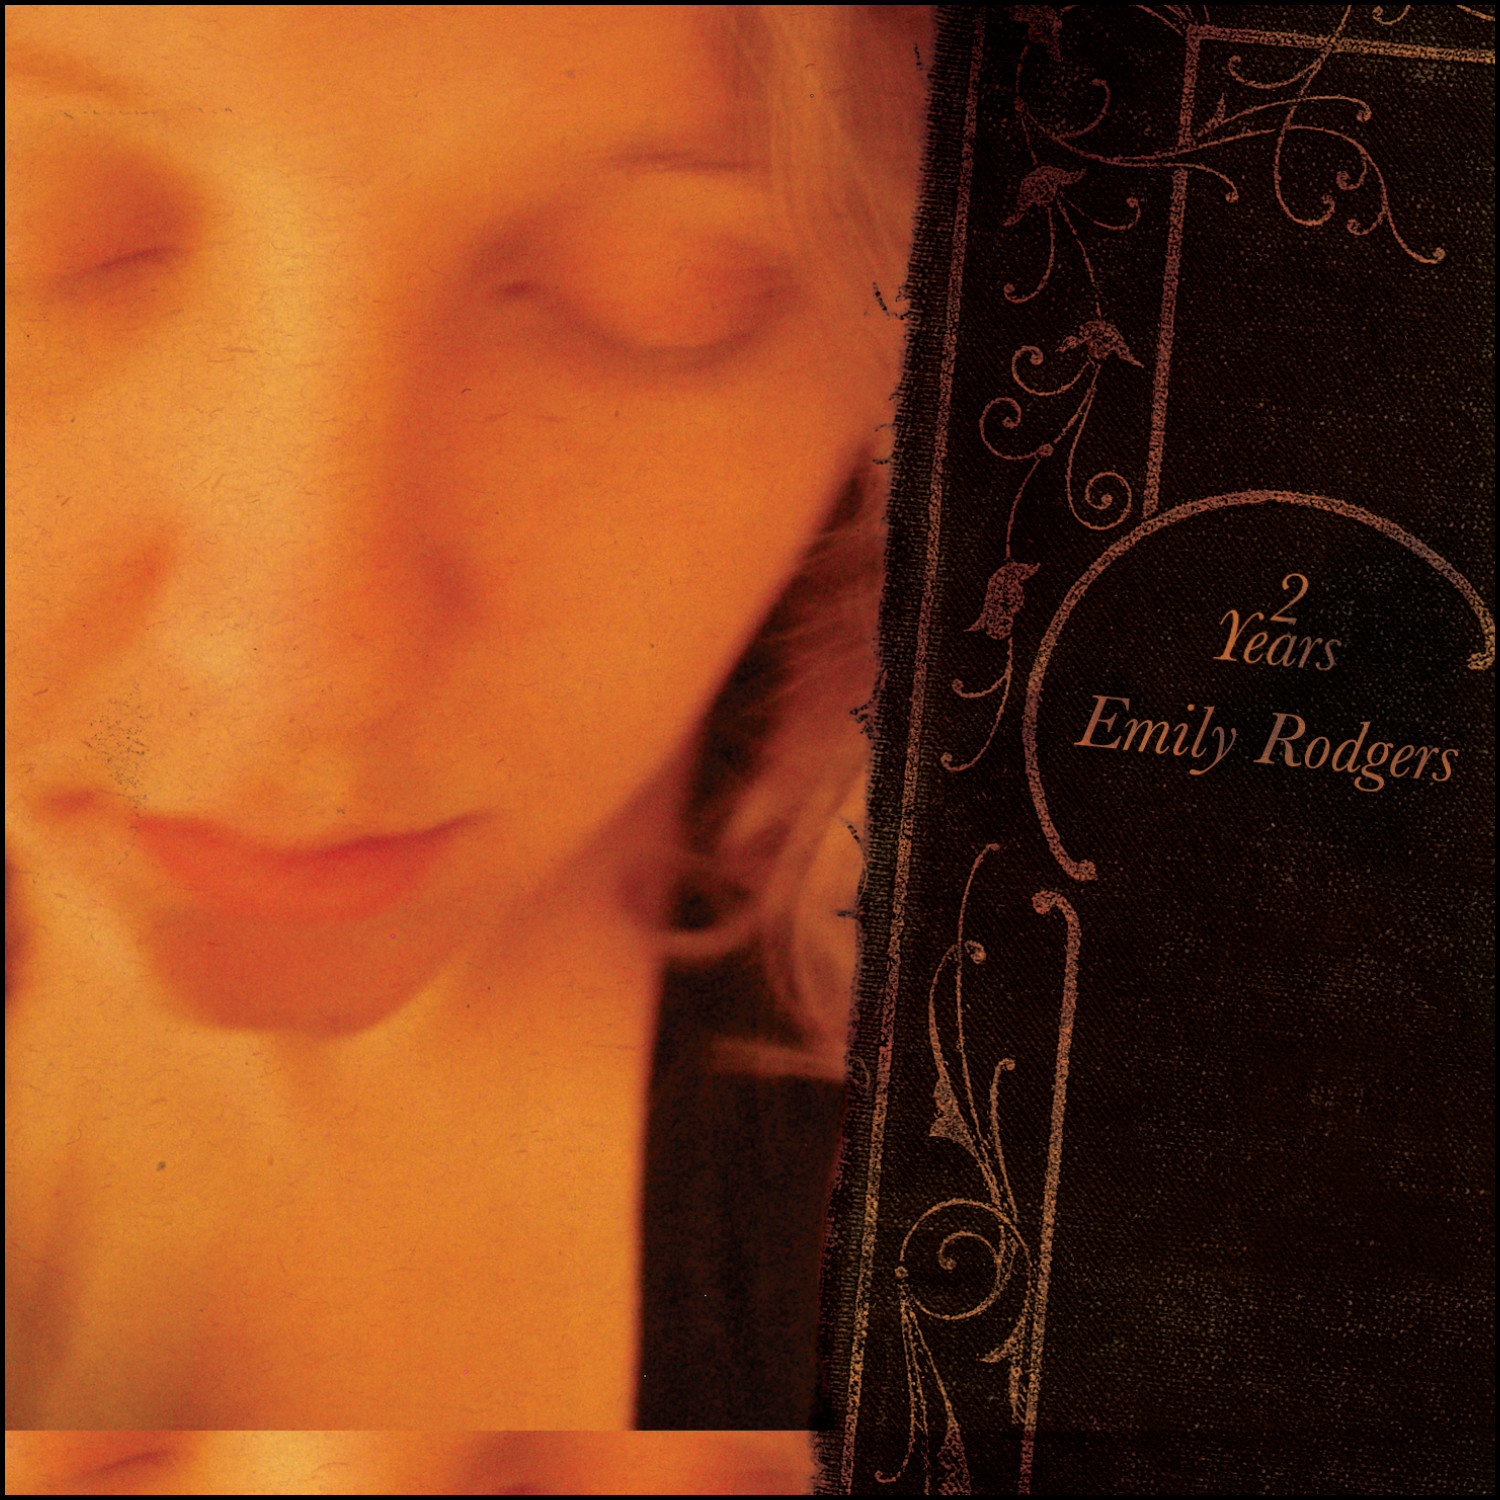 STEREO EMBERS EXCLUSIVE – Hear the Kramer-produced “Two Years” album from Emily Rodgers